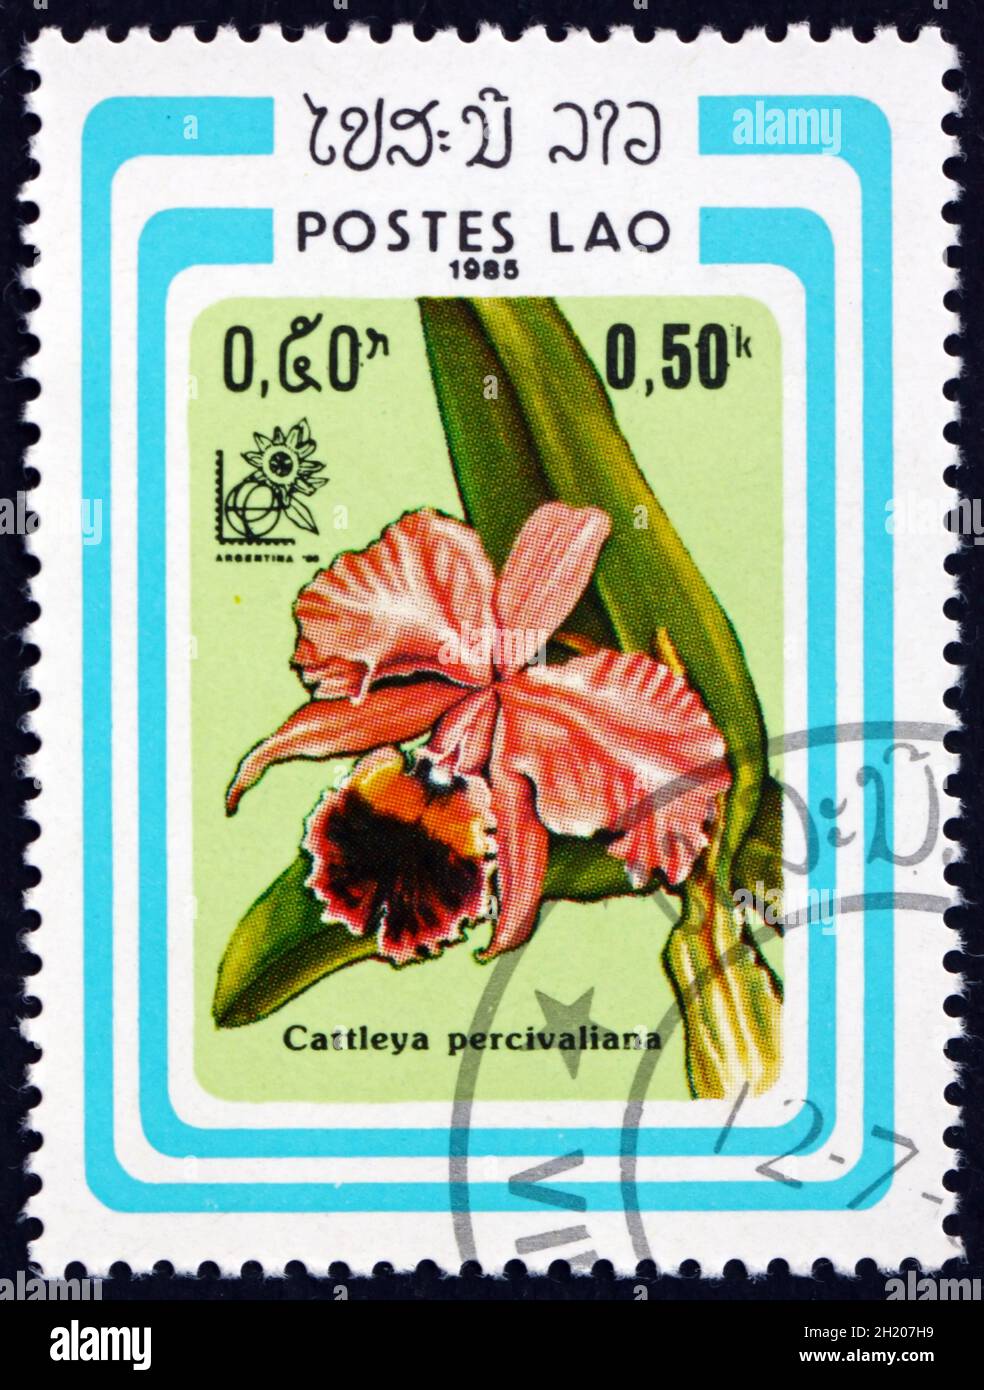 LAOS - CIRCA 1985: a stamp printed in Laos shows cattleya percivaliana, is a species of orchid, circa 1985 Stock Photo